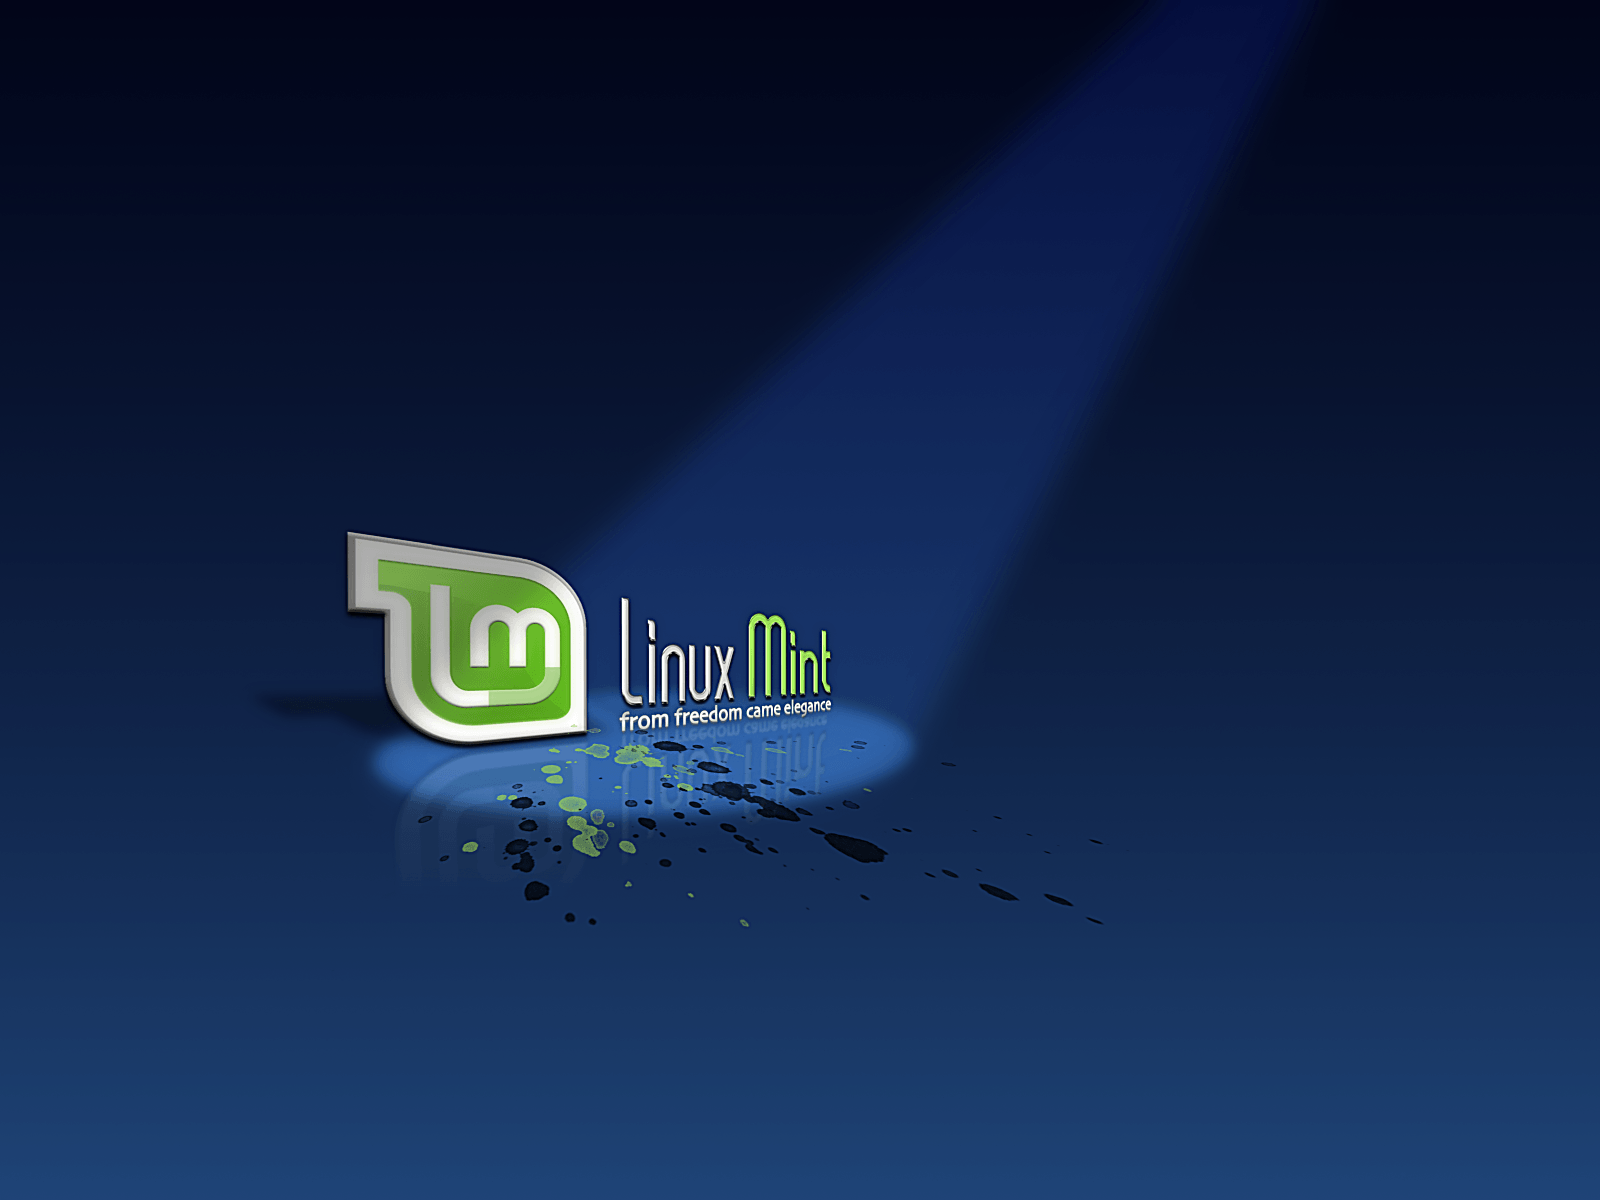 Linux Mint Forums • View topic of the Month, August